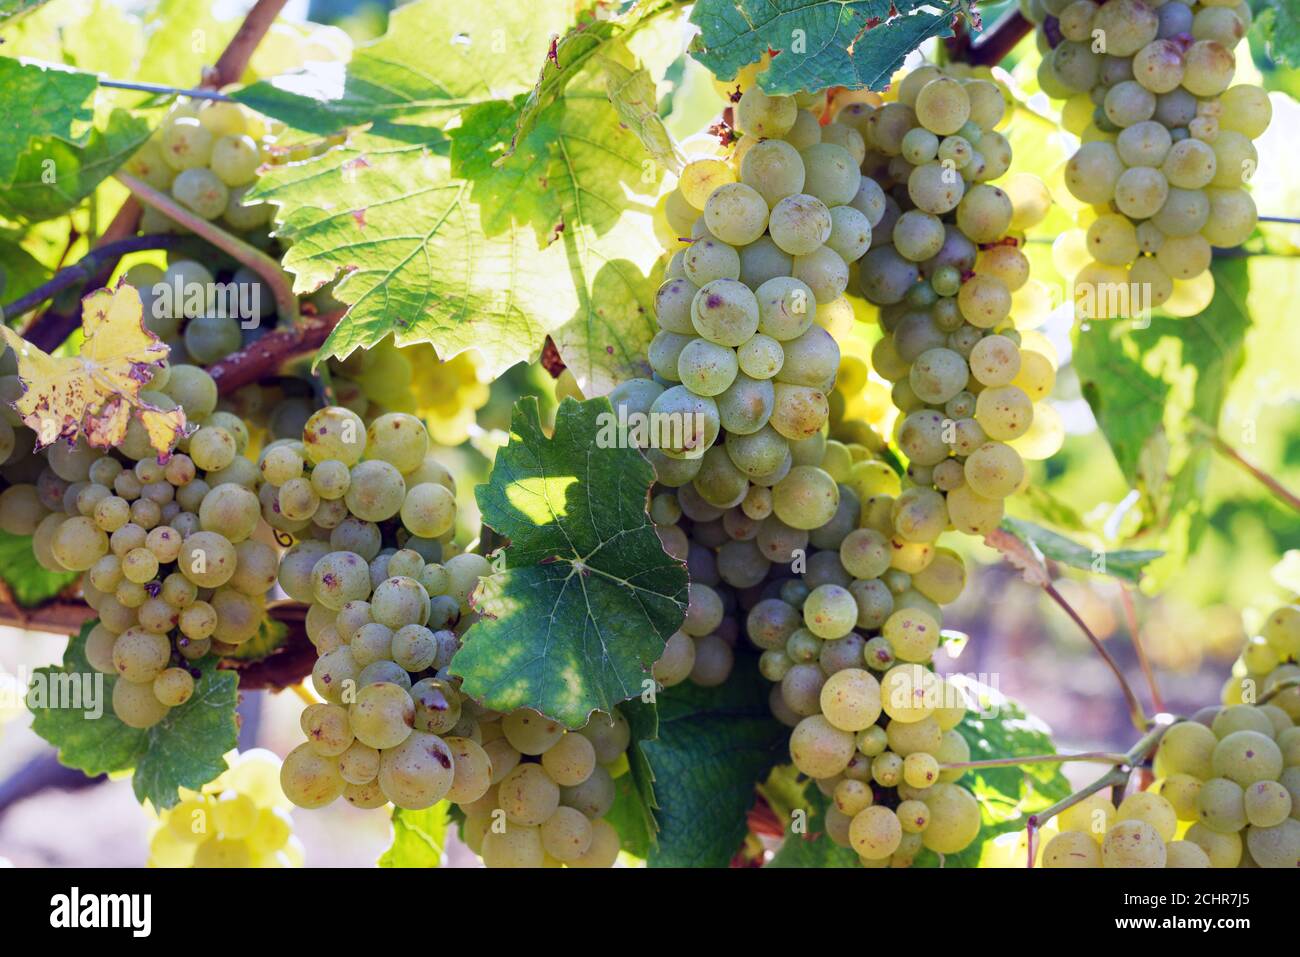 Grapes in the sunlight, just before harvest. Stock Photo